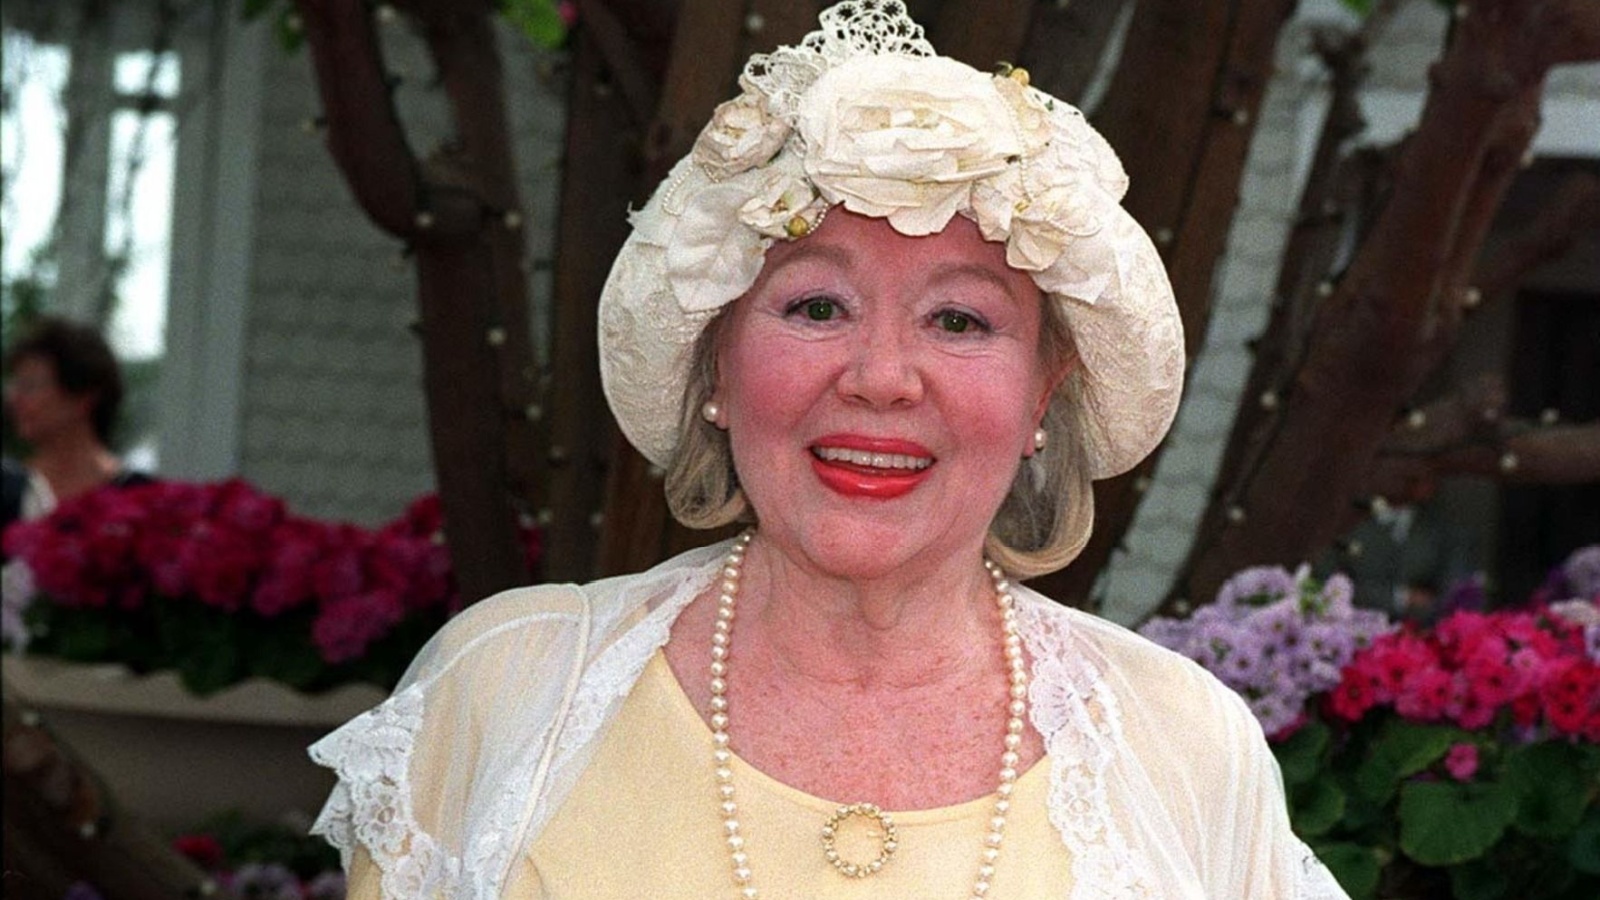 <p><span>Glynis Johns is an Academy Award-nominated actress who is fondly remembered for her work on <em>Mary Poppins</em>. In the film, she starred alongside Julie Andrews as Winifred Banks. Glynis reached 100 years old before passing in an assisted living facility in Los Angeles.</span></p><p><span>Glynis Johns is reported to have died of natural causes. She continued acting well into her golden years, with her last performances being in Molly Shannon’s <em>Superstar</em>.</span></p><p><a class="theme markdown__link" href="https://www.msn.com/en-us/channel/source/Movie%20Nights/sr-vid-d3yx0j8wg3fdqxaqdfi2763g5nci5pve998s6wqpatsfh409wnvs" rel="noopener noreferrer">Follow us on MSN to see more of our exclusive entertainment content.</a></p>